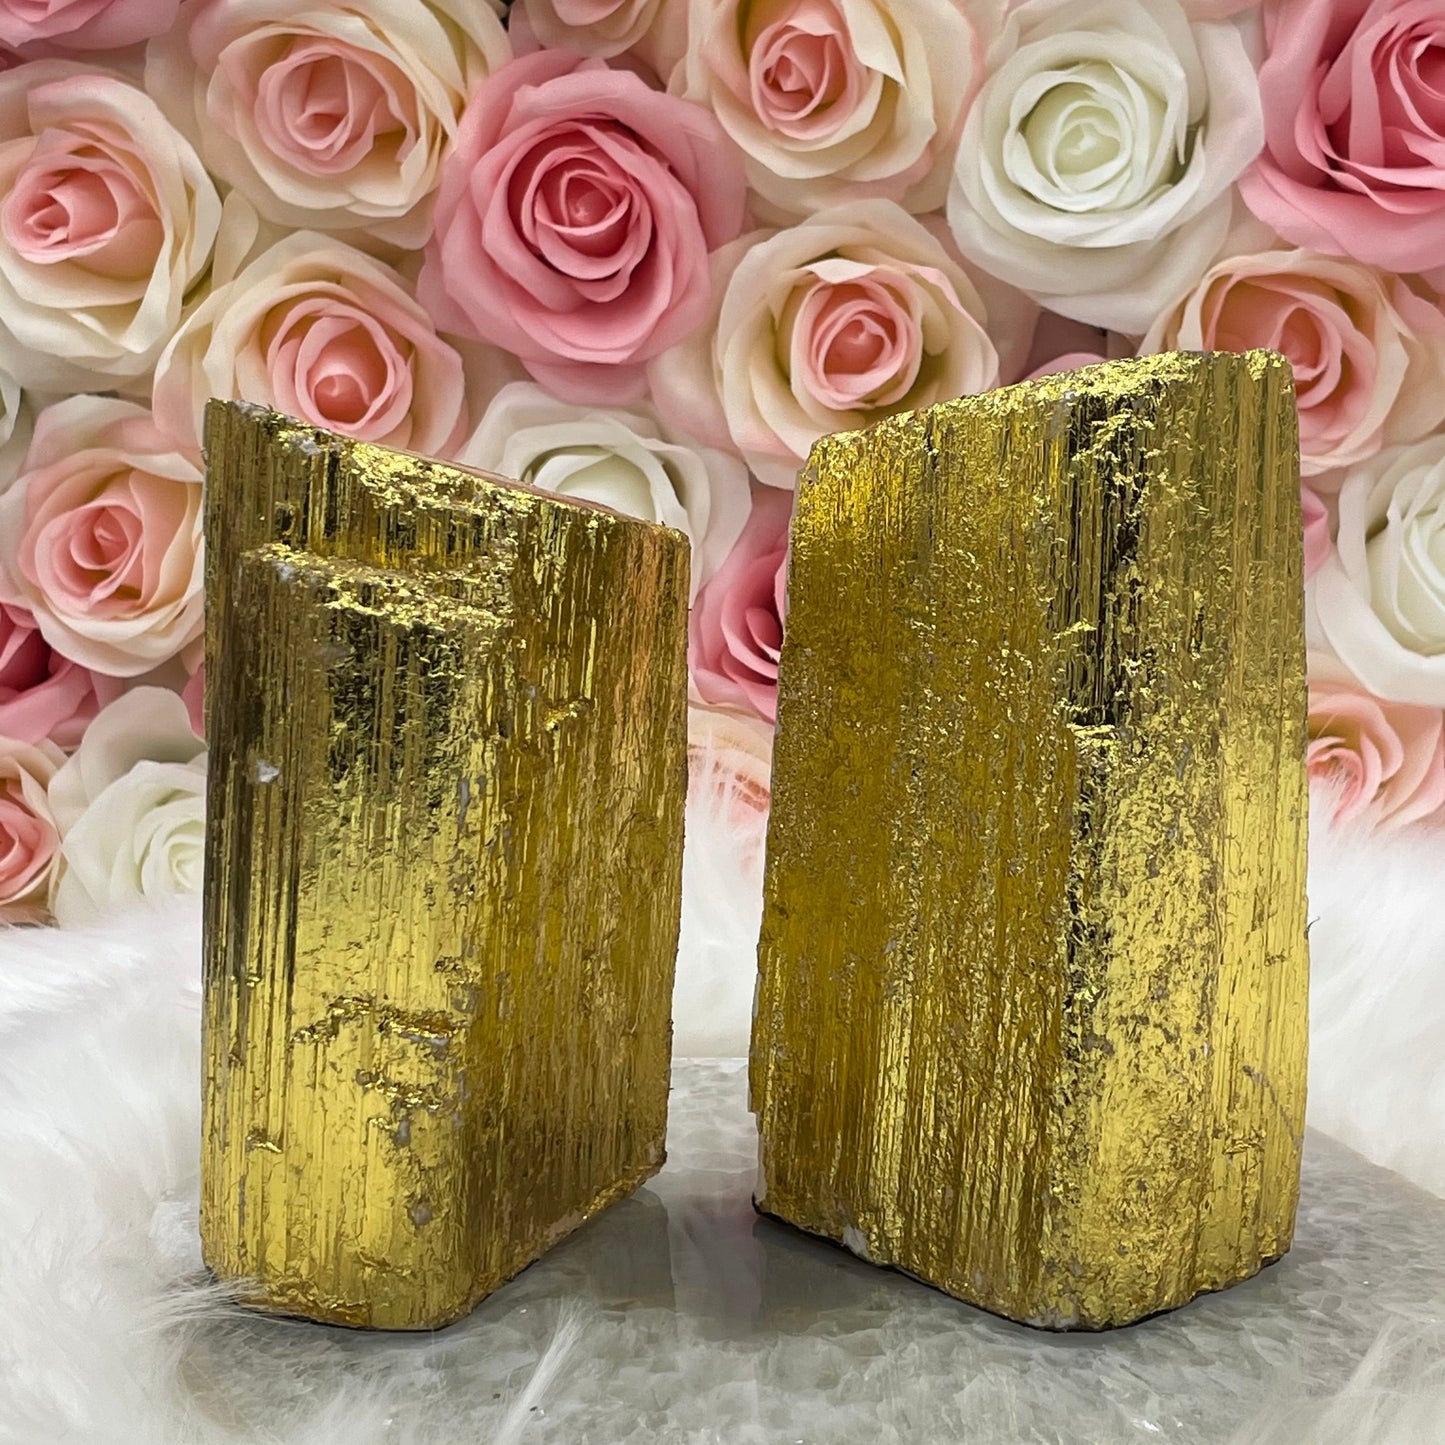 Foiled Crystal Bookends